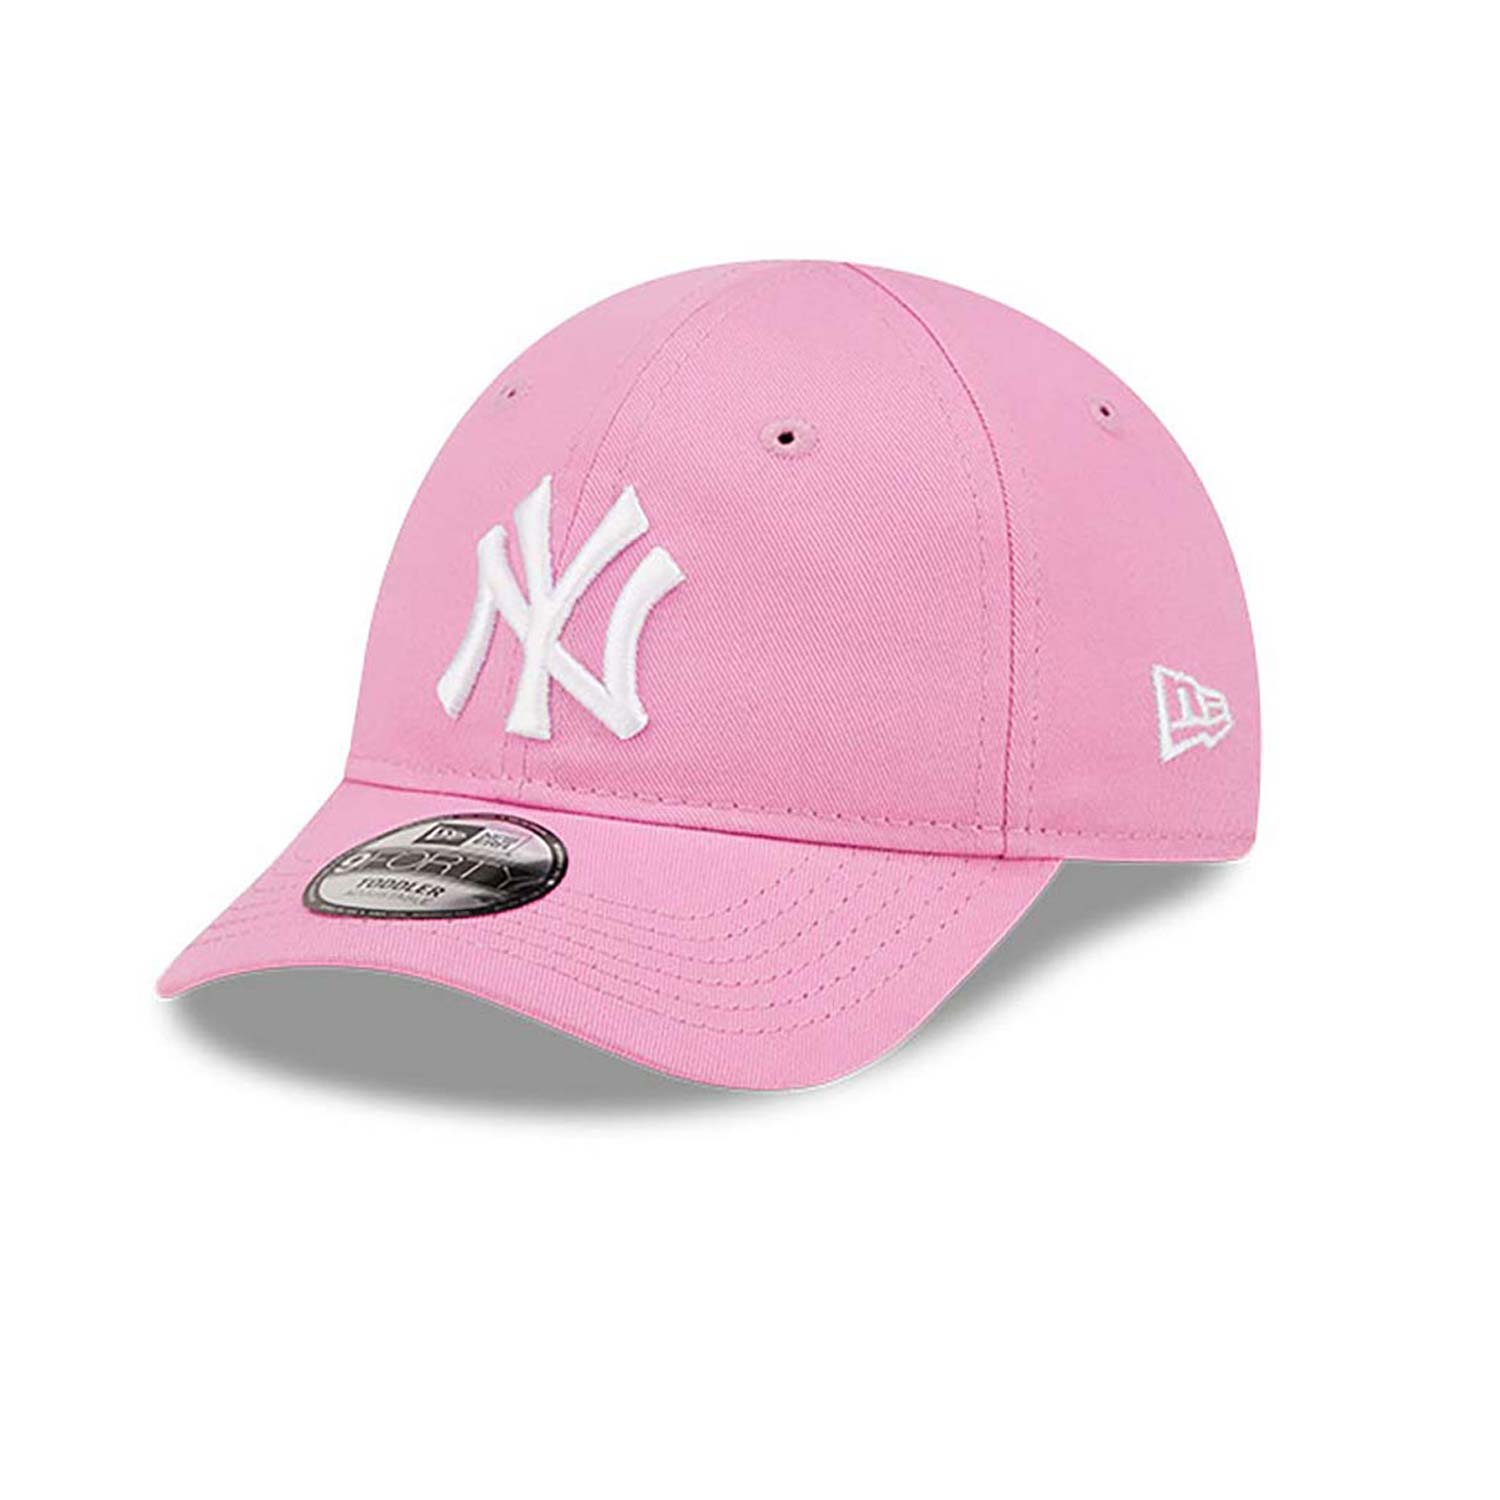 Official New Era Toddler League Essential New York Yankees 9FORTY Cap ...